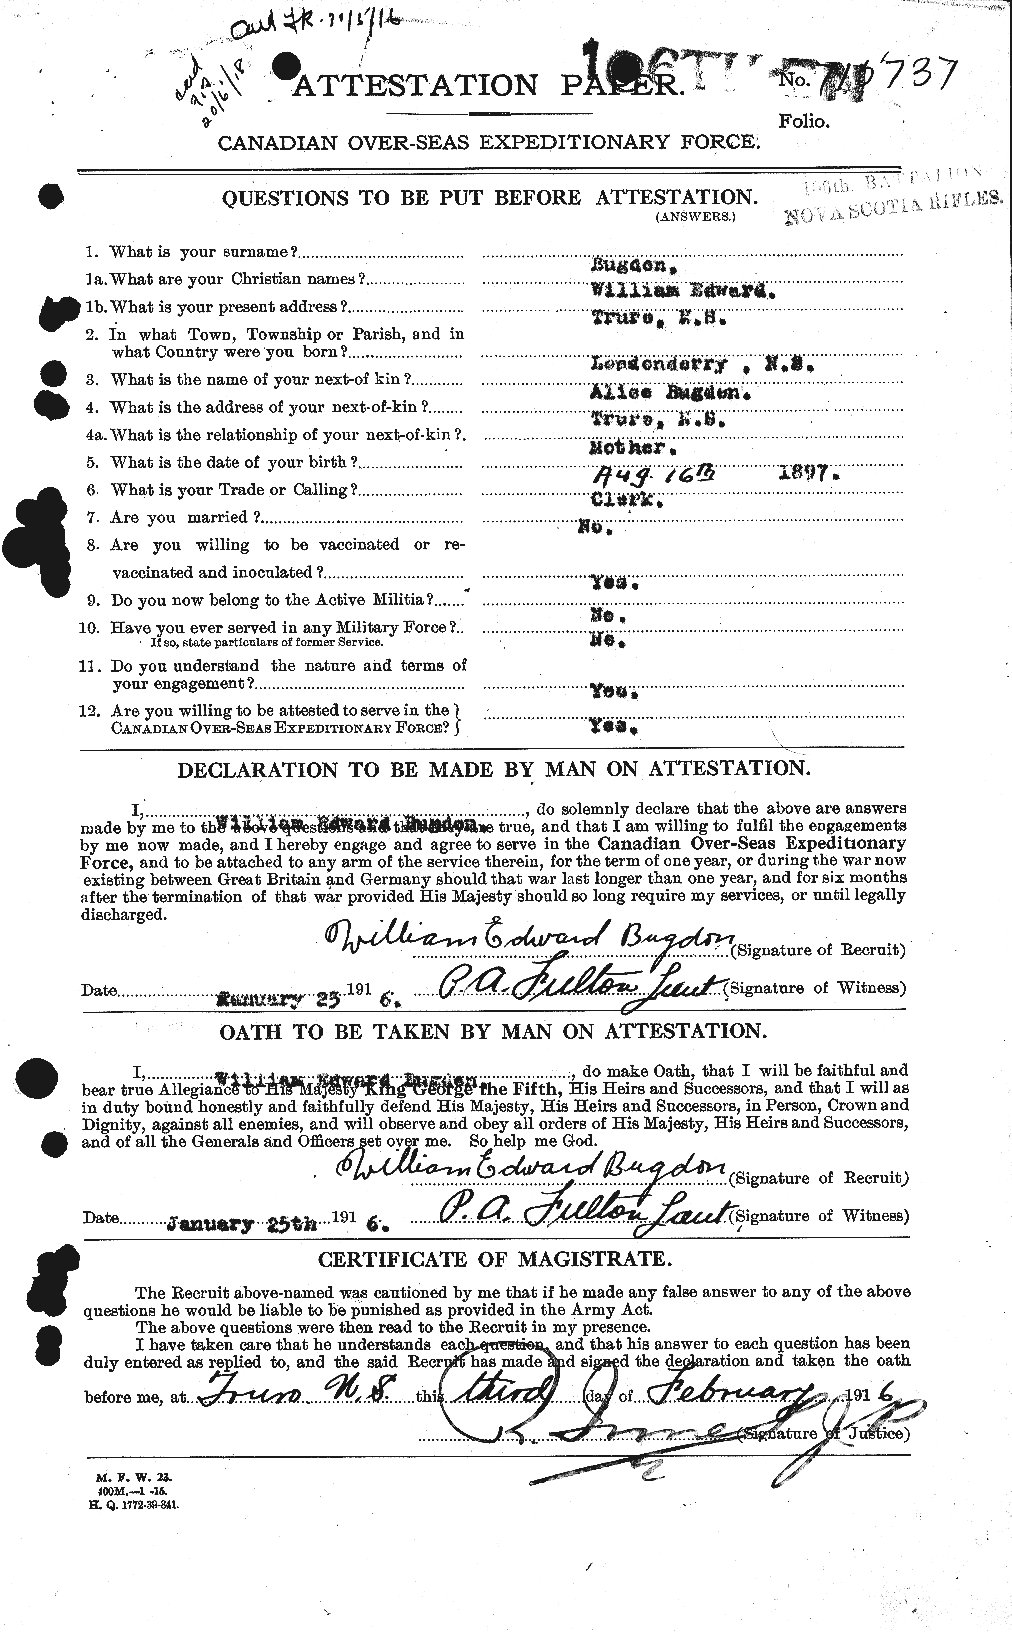 Personnel Records of the First World War - CEF 270506a